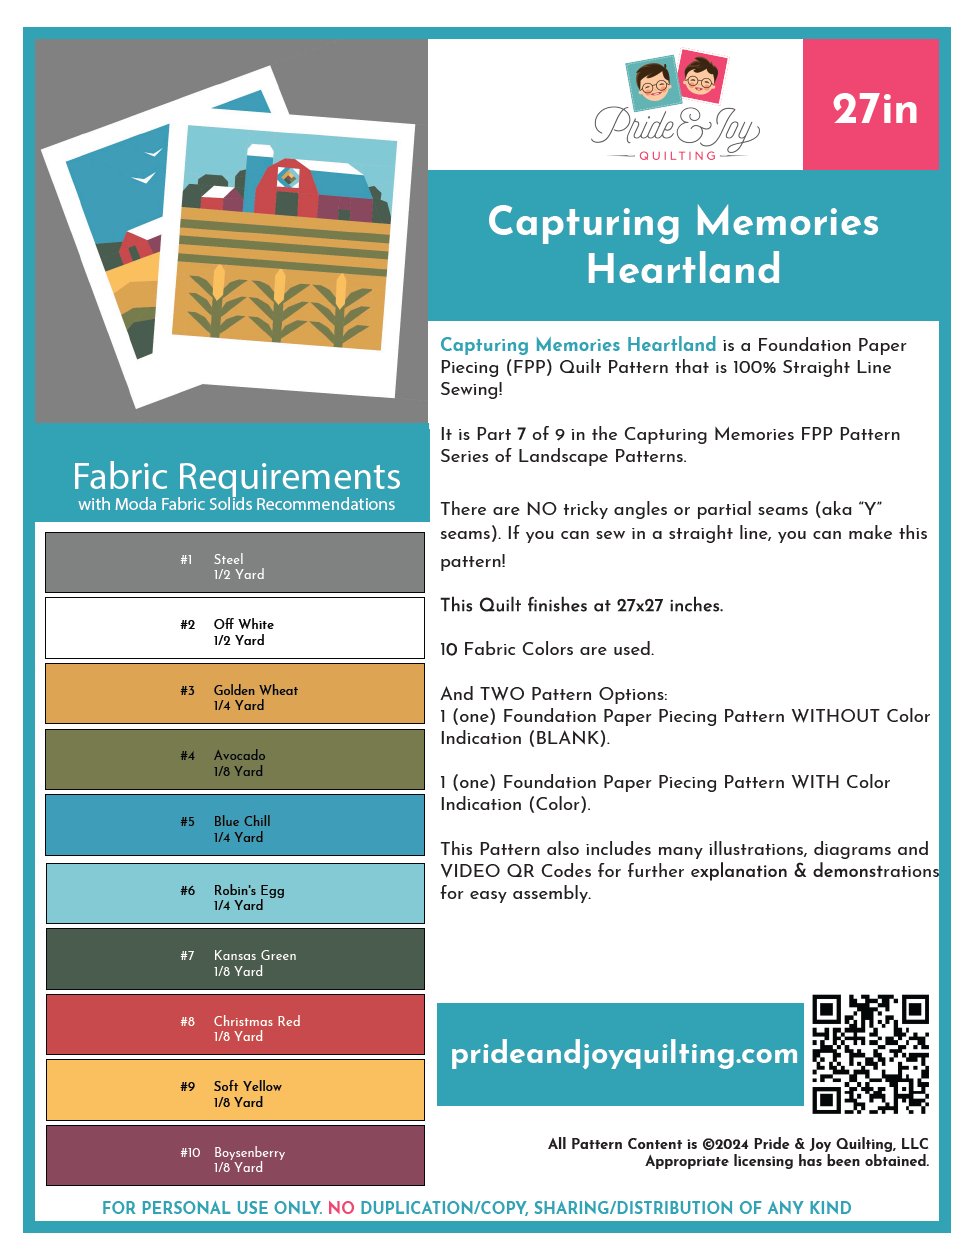 PDF (Part 7 of 9) Capturing Memories HEARTLAND, A Foundation Paper Piecing Quilt Pattern Series